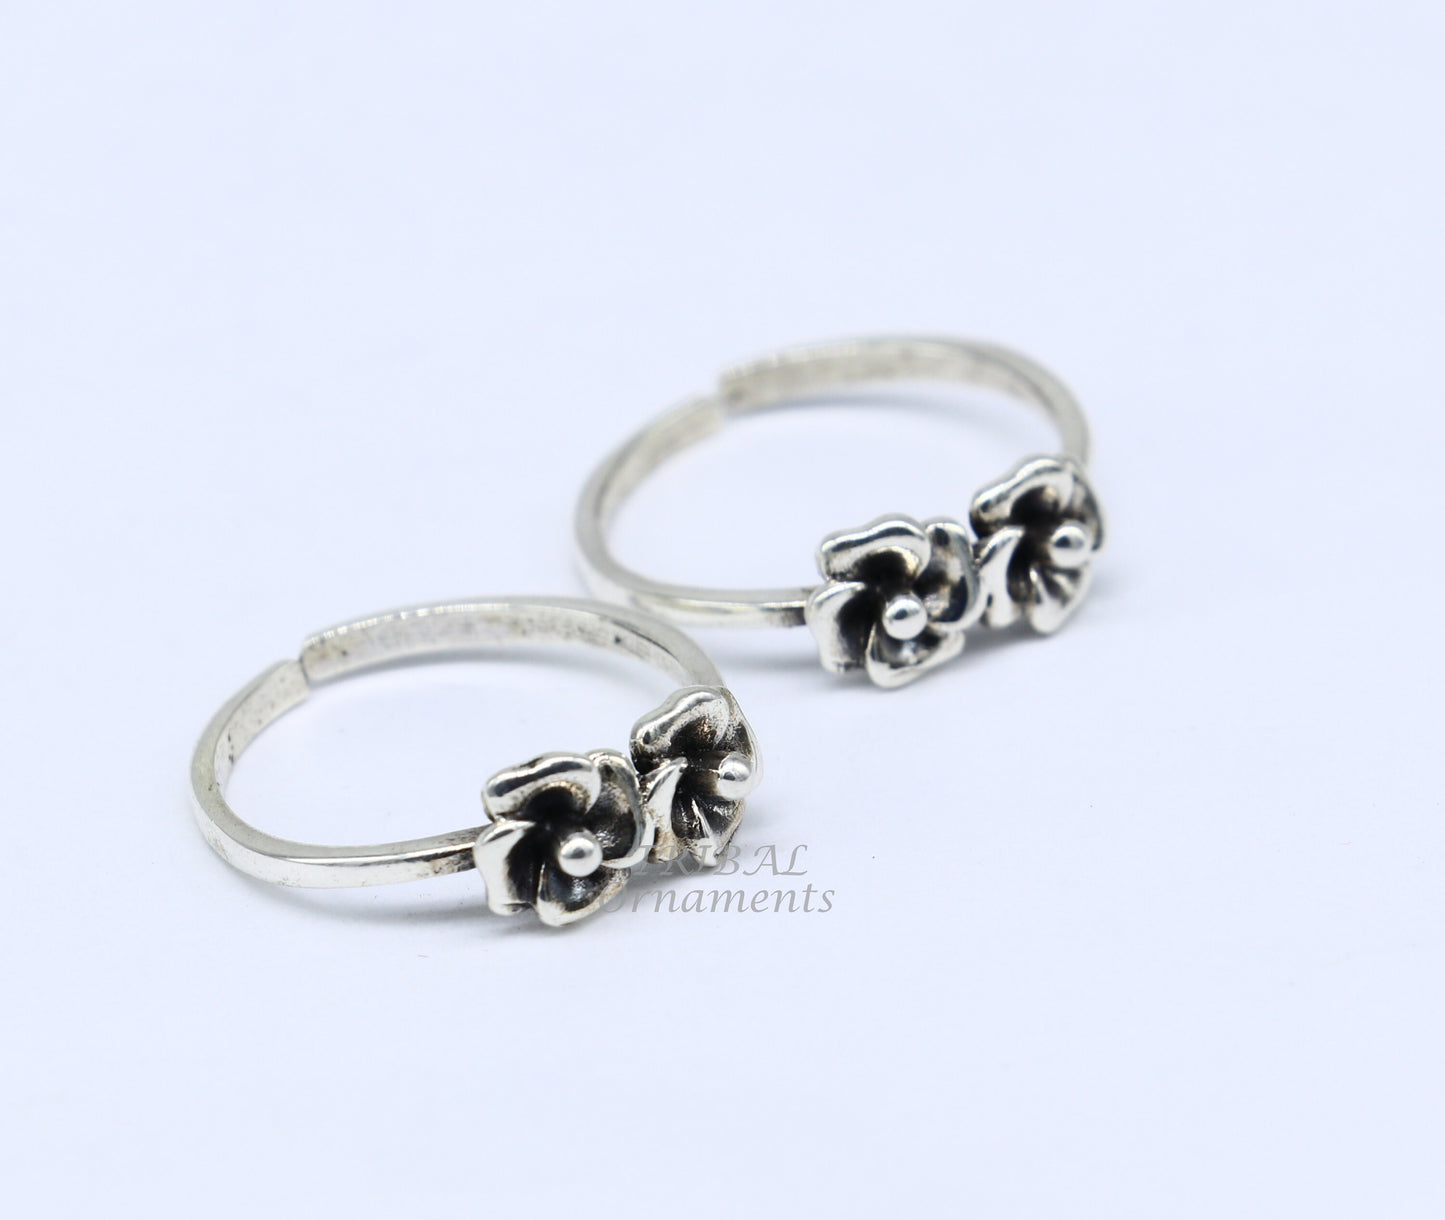 925 sterling silver handcrafted unique design vintage ethnic design brides toe ring for girl's women's ytr25 - TRIBAL ORNAMENTS